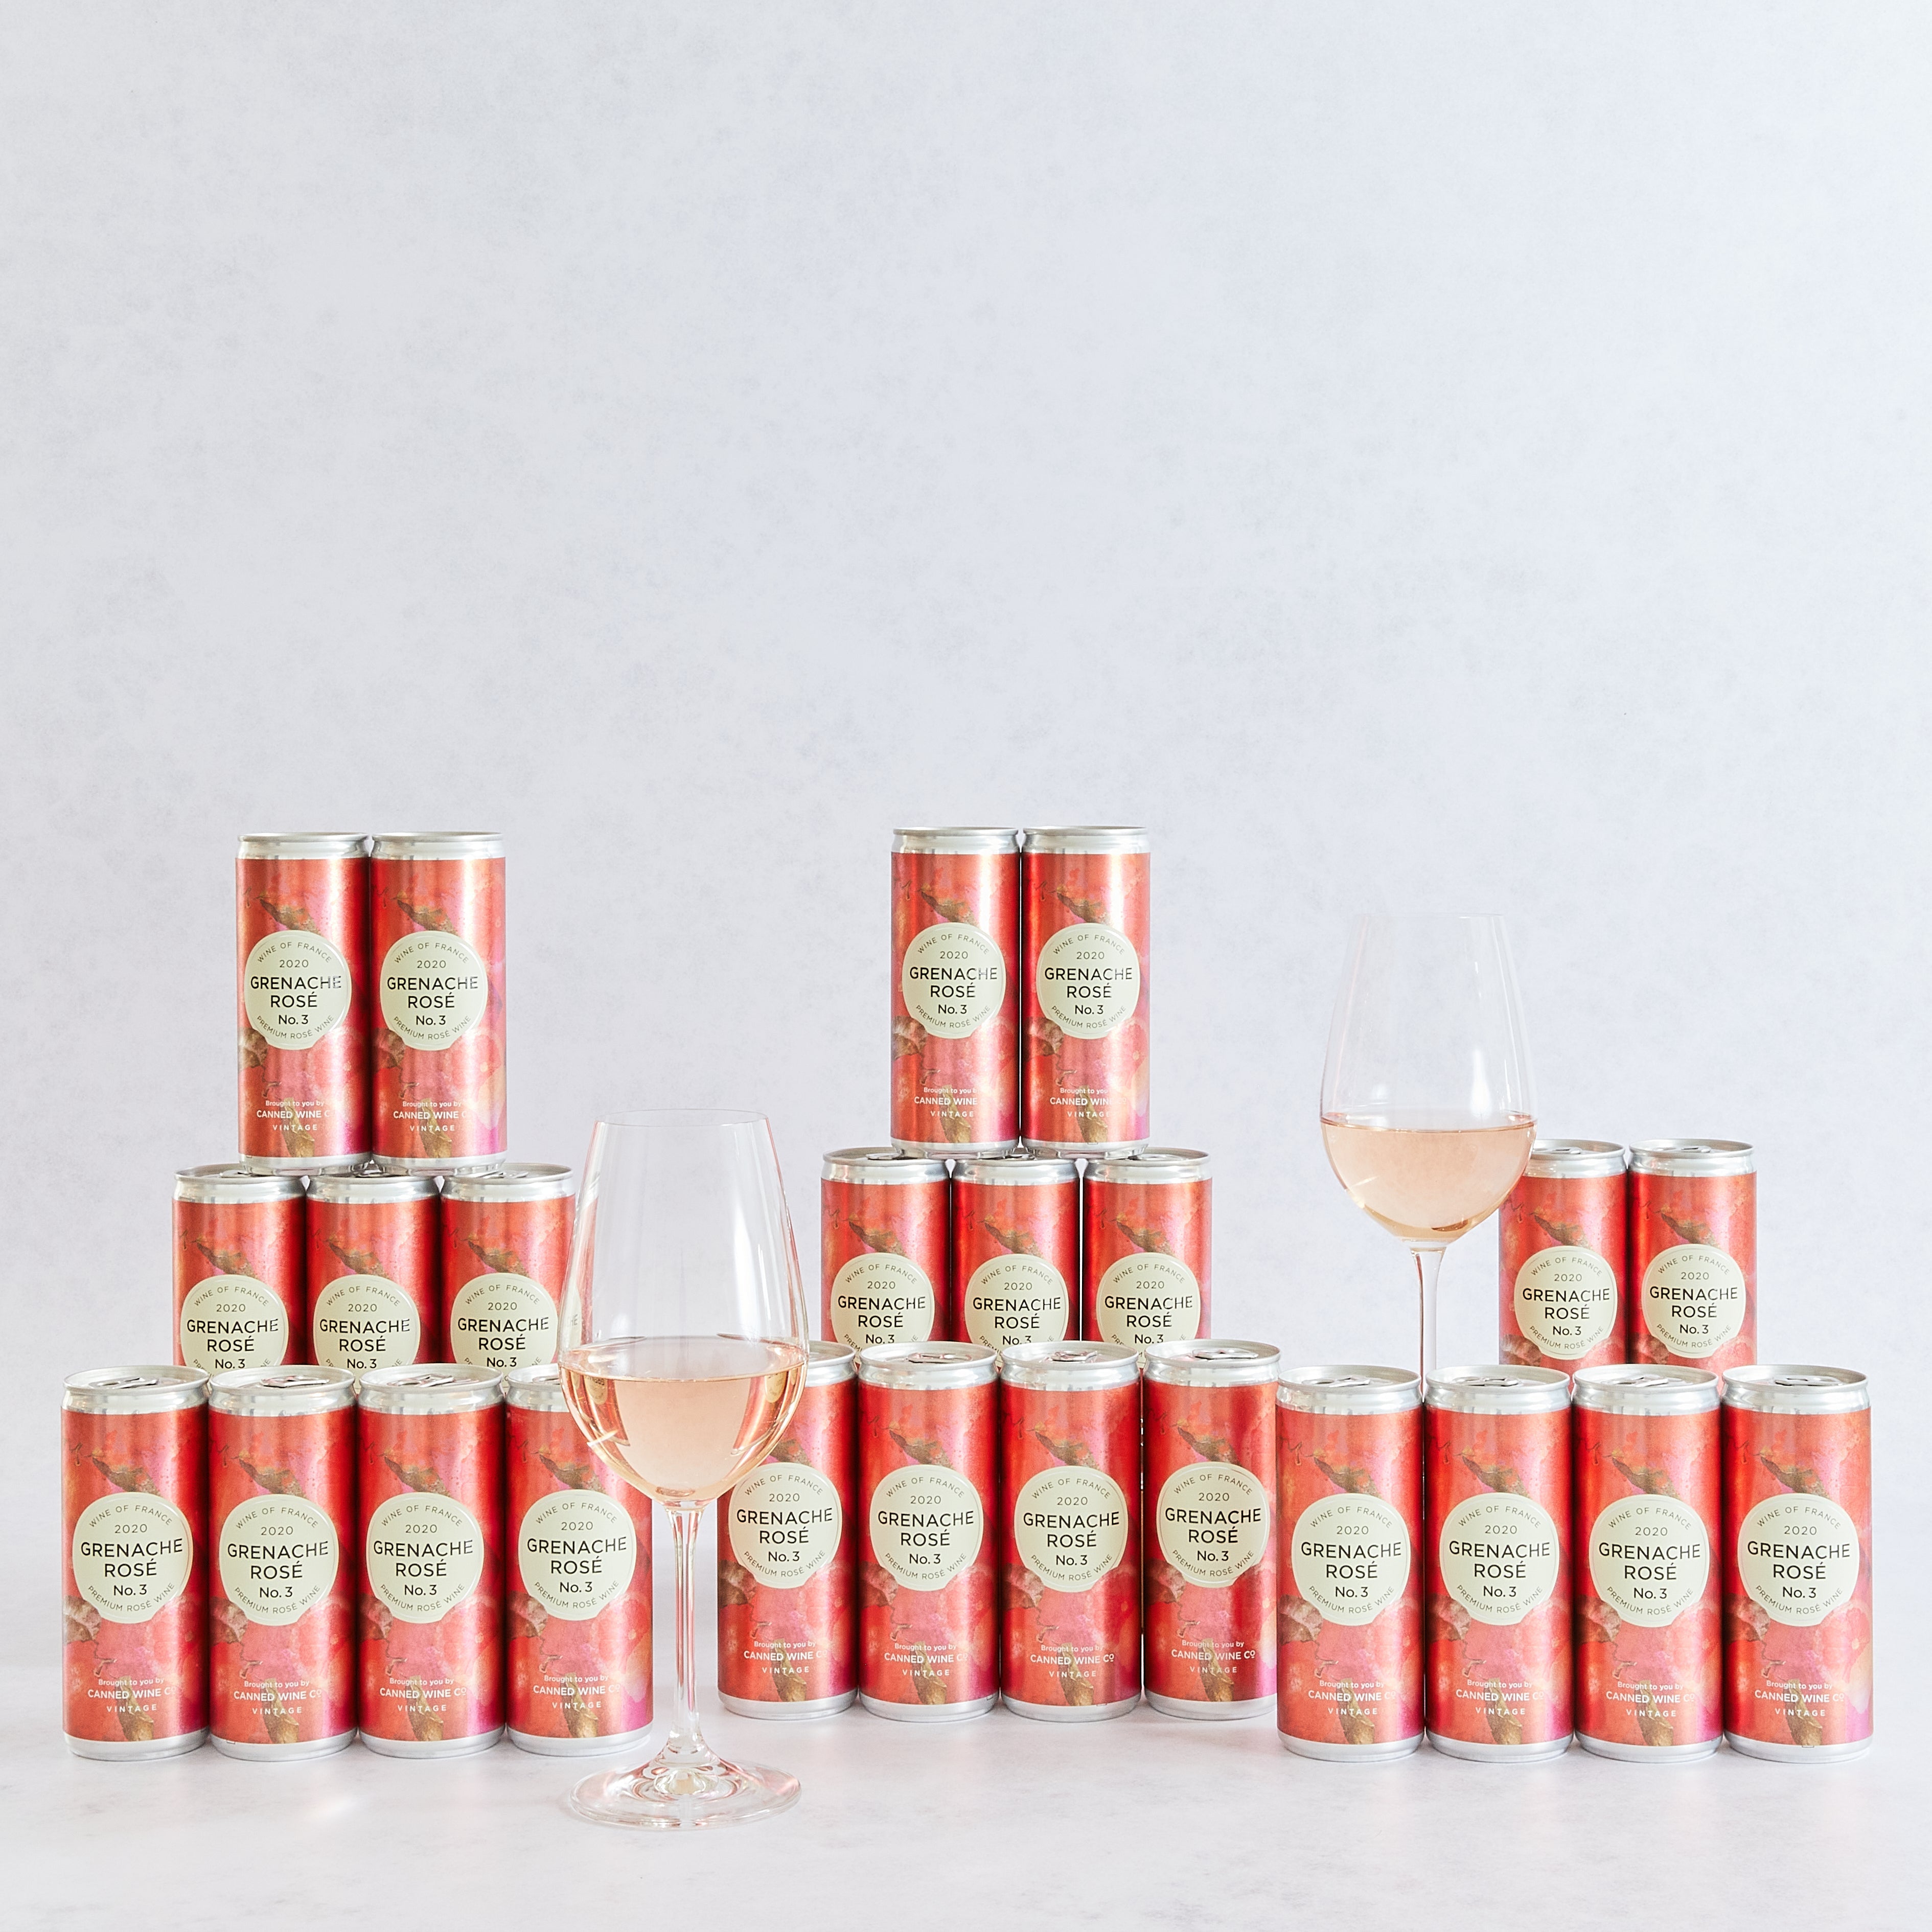 Canned Buy – Co 2021 Can Rosé Wine in Grenache Wines Wine - Canned Online